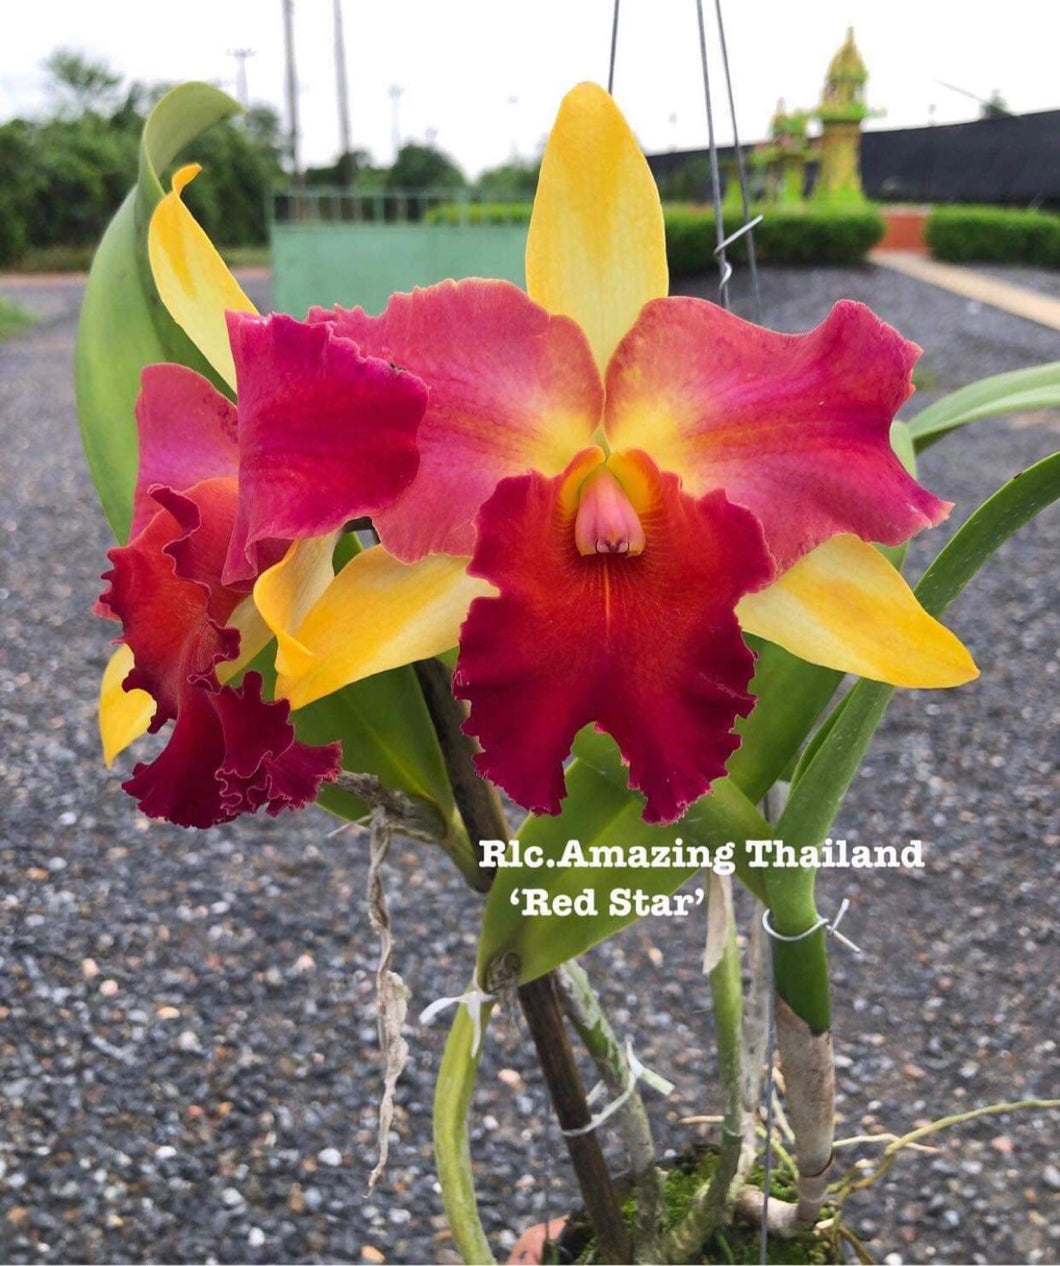 Compot: Rlc. Amazing Thailand ‘Red Star ‘